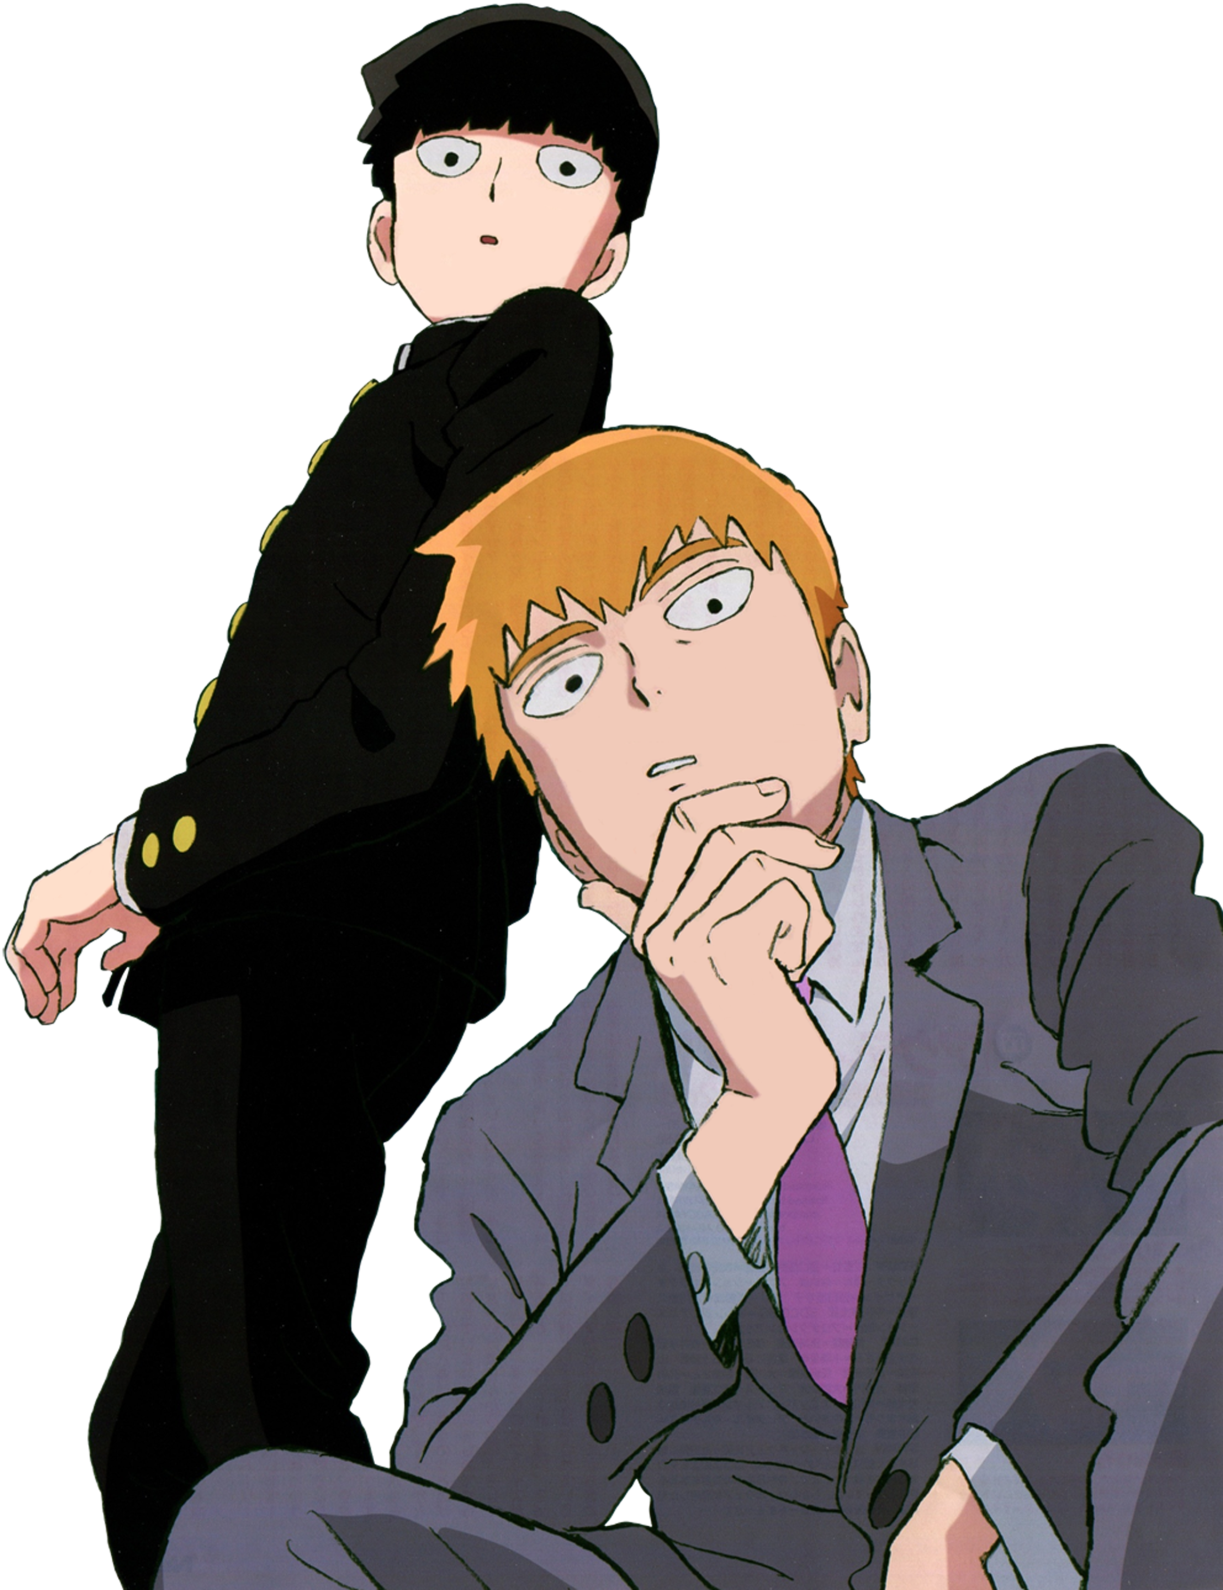 Download and share clipart about Mob Psycho 100 Png, Find more high quality...